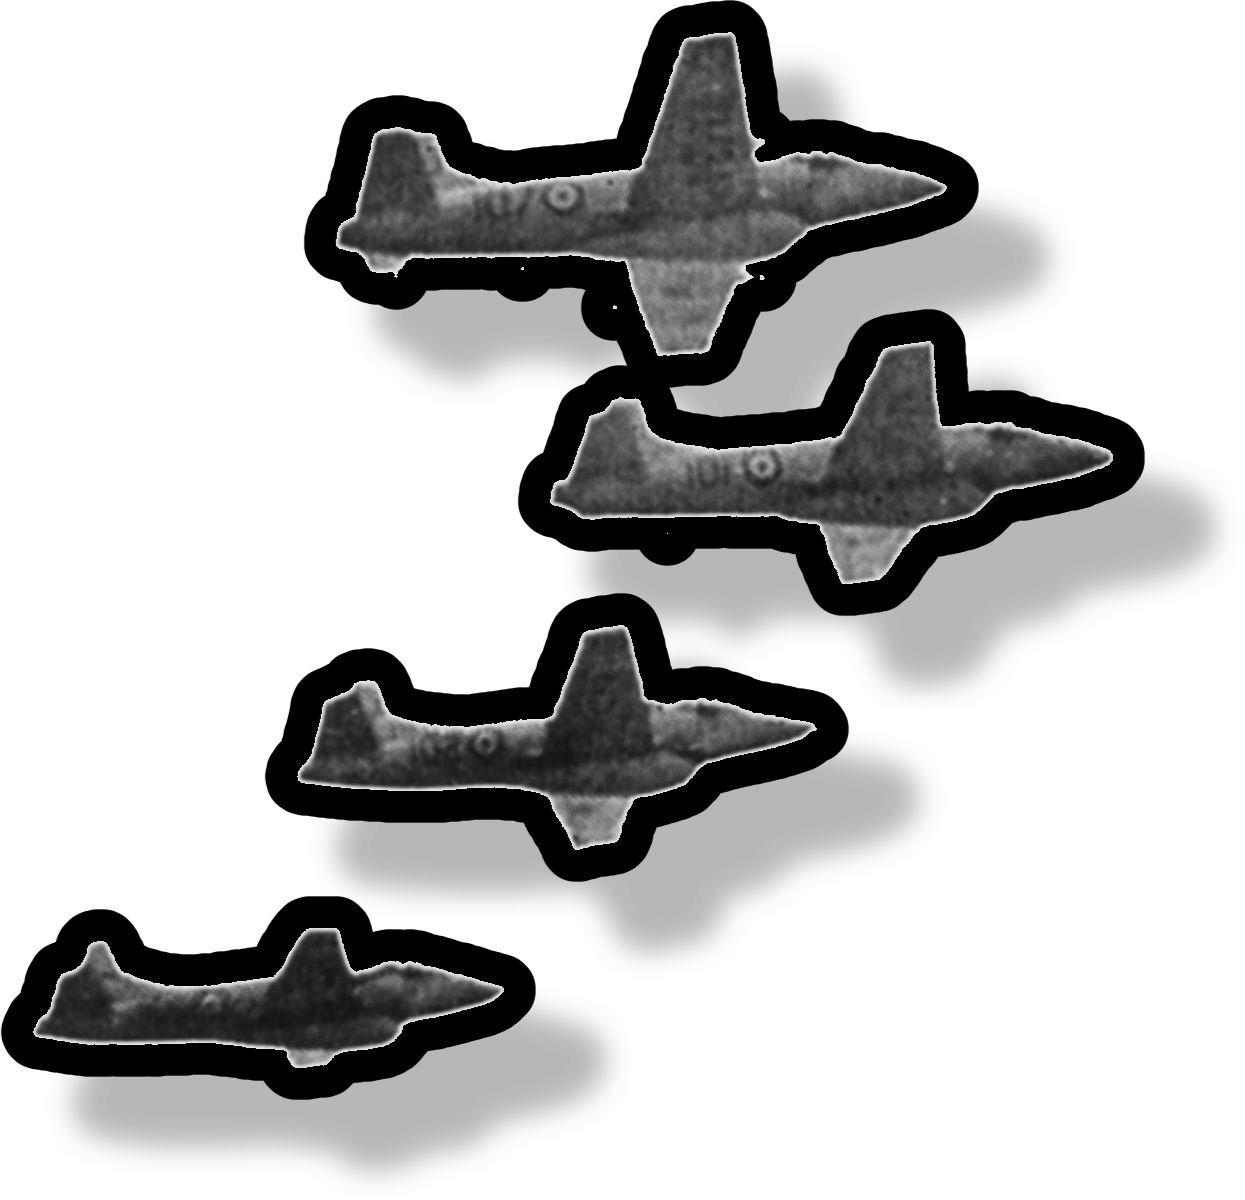 Four aeroplanes in formation